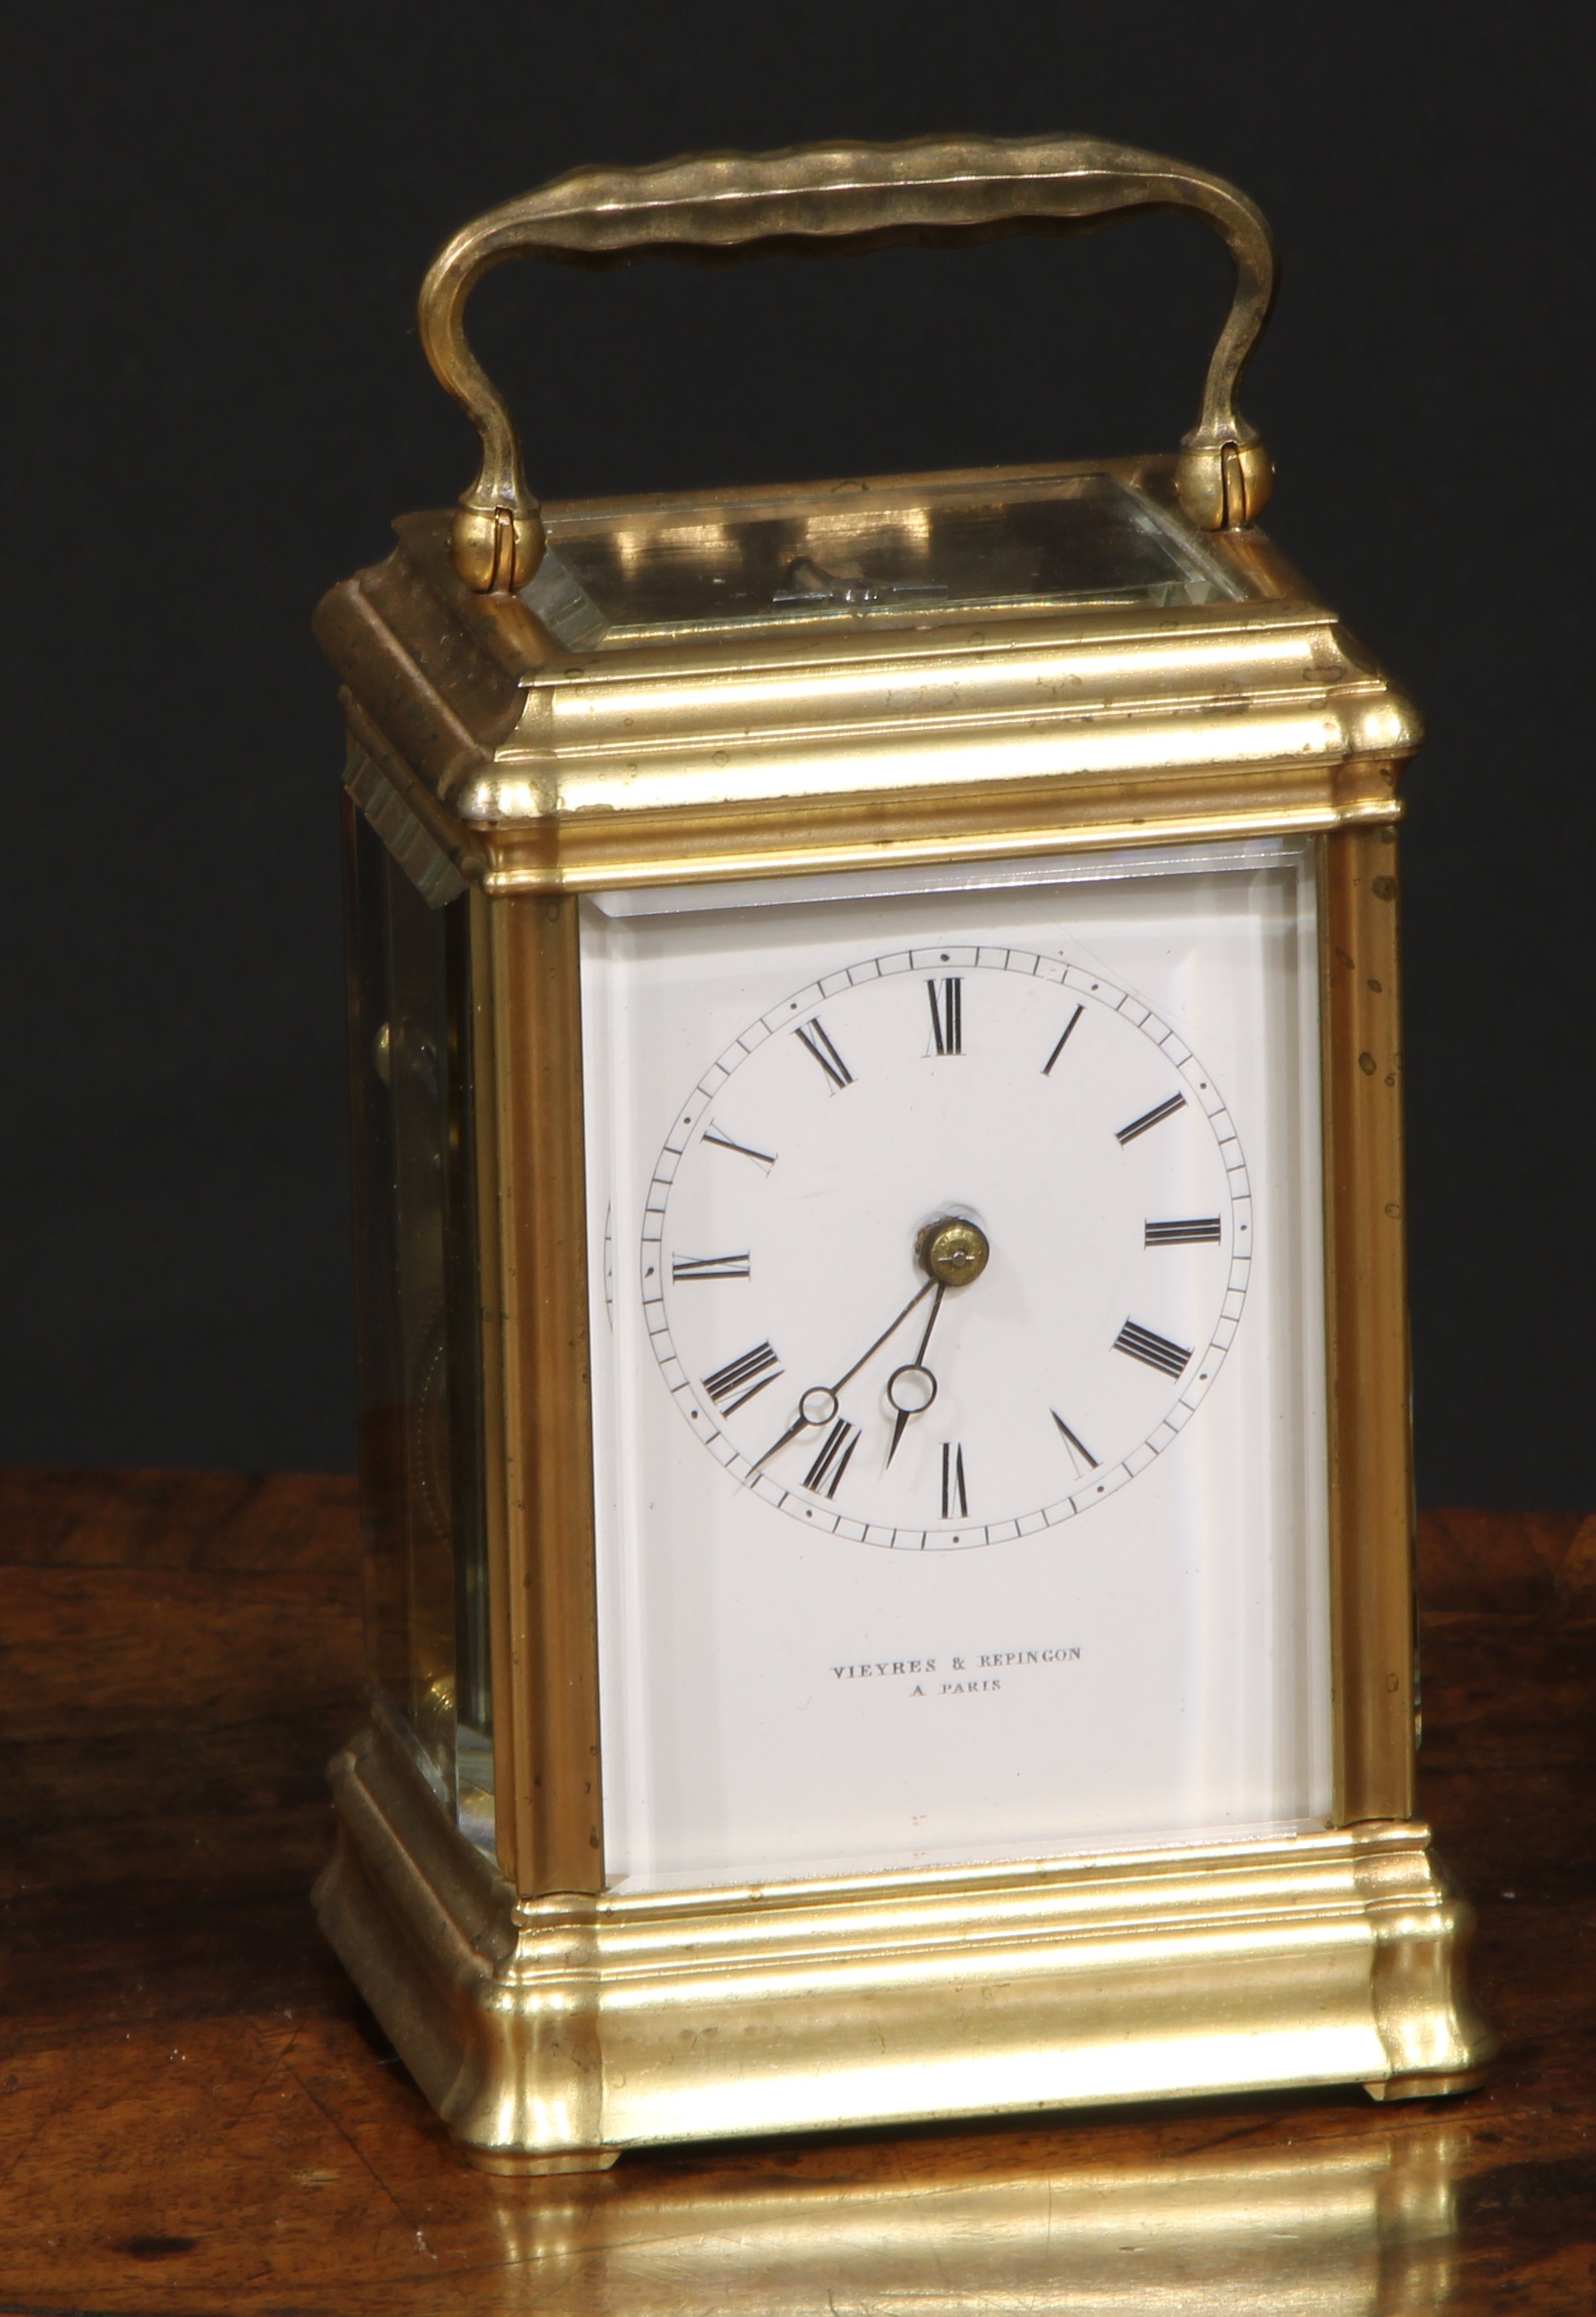 A 19th century French gilt brass petit sonnerie carriage clock, by Vieyres & Repingon, Paris, 6cm